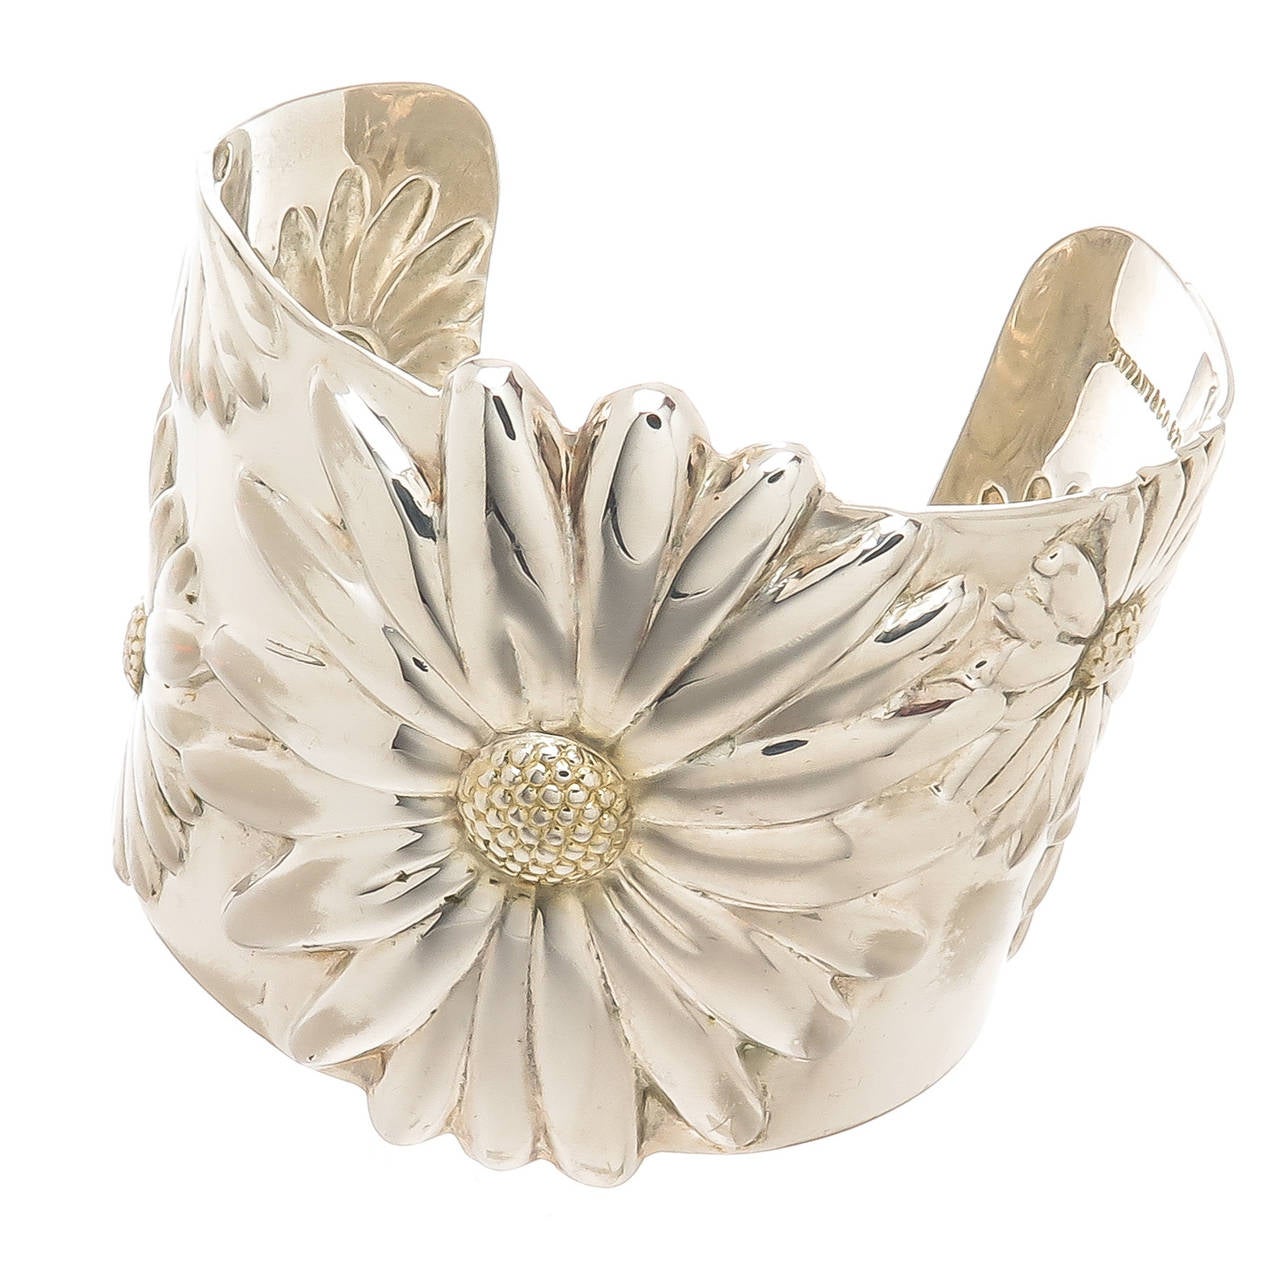 Tiffany & Company sterling silver with Gold Wash Accents Daisy Cuff Bracelet. Measuring 2 inch wide.